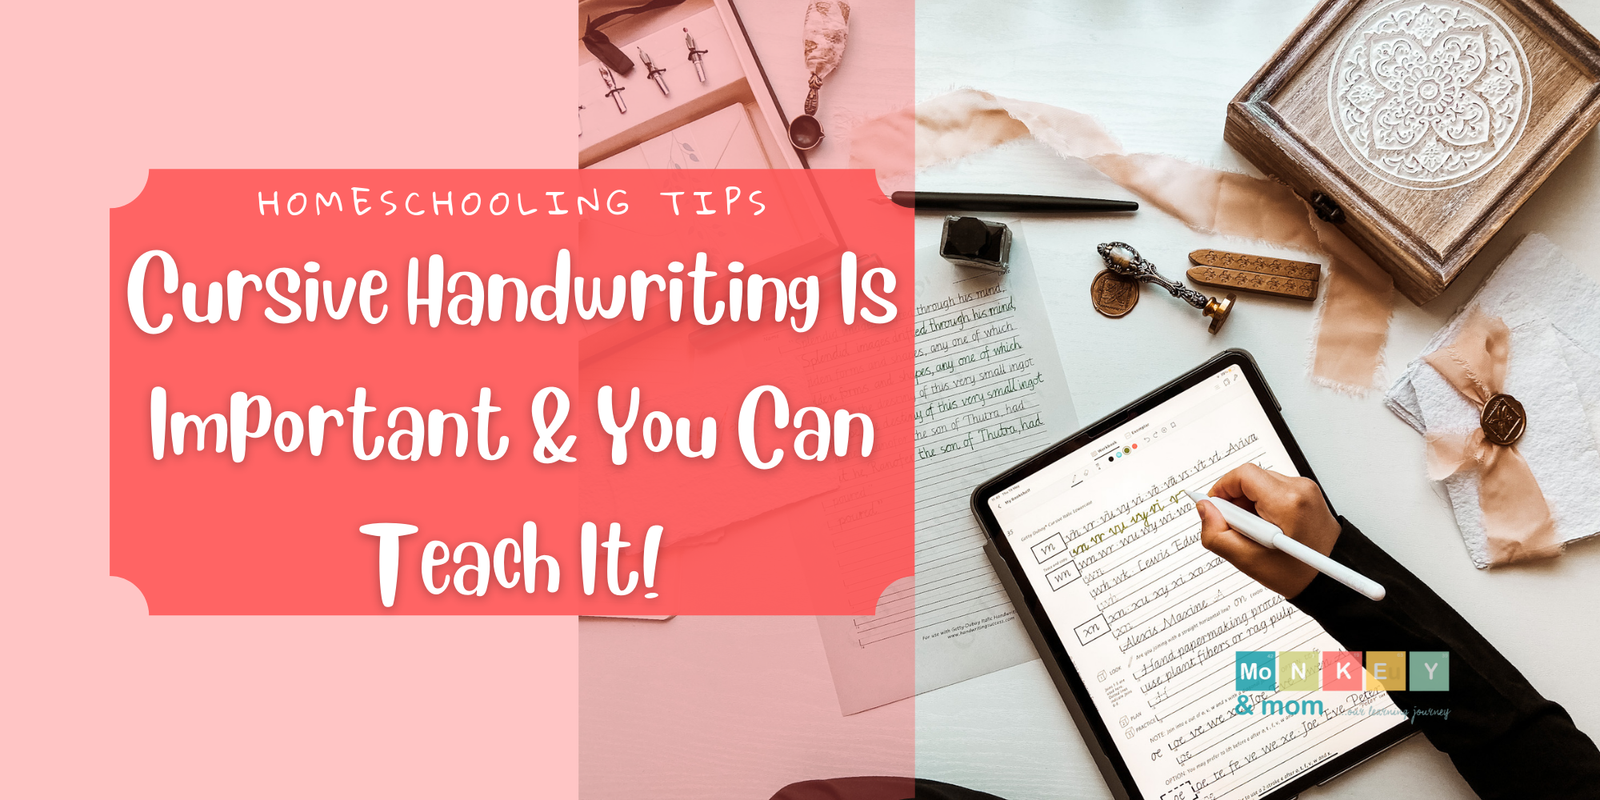 Cursive Handwriting is important and you can teach it at home